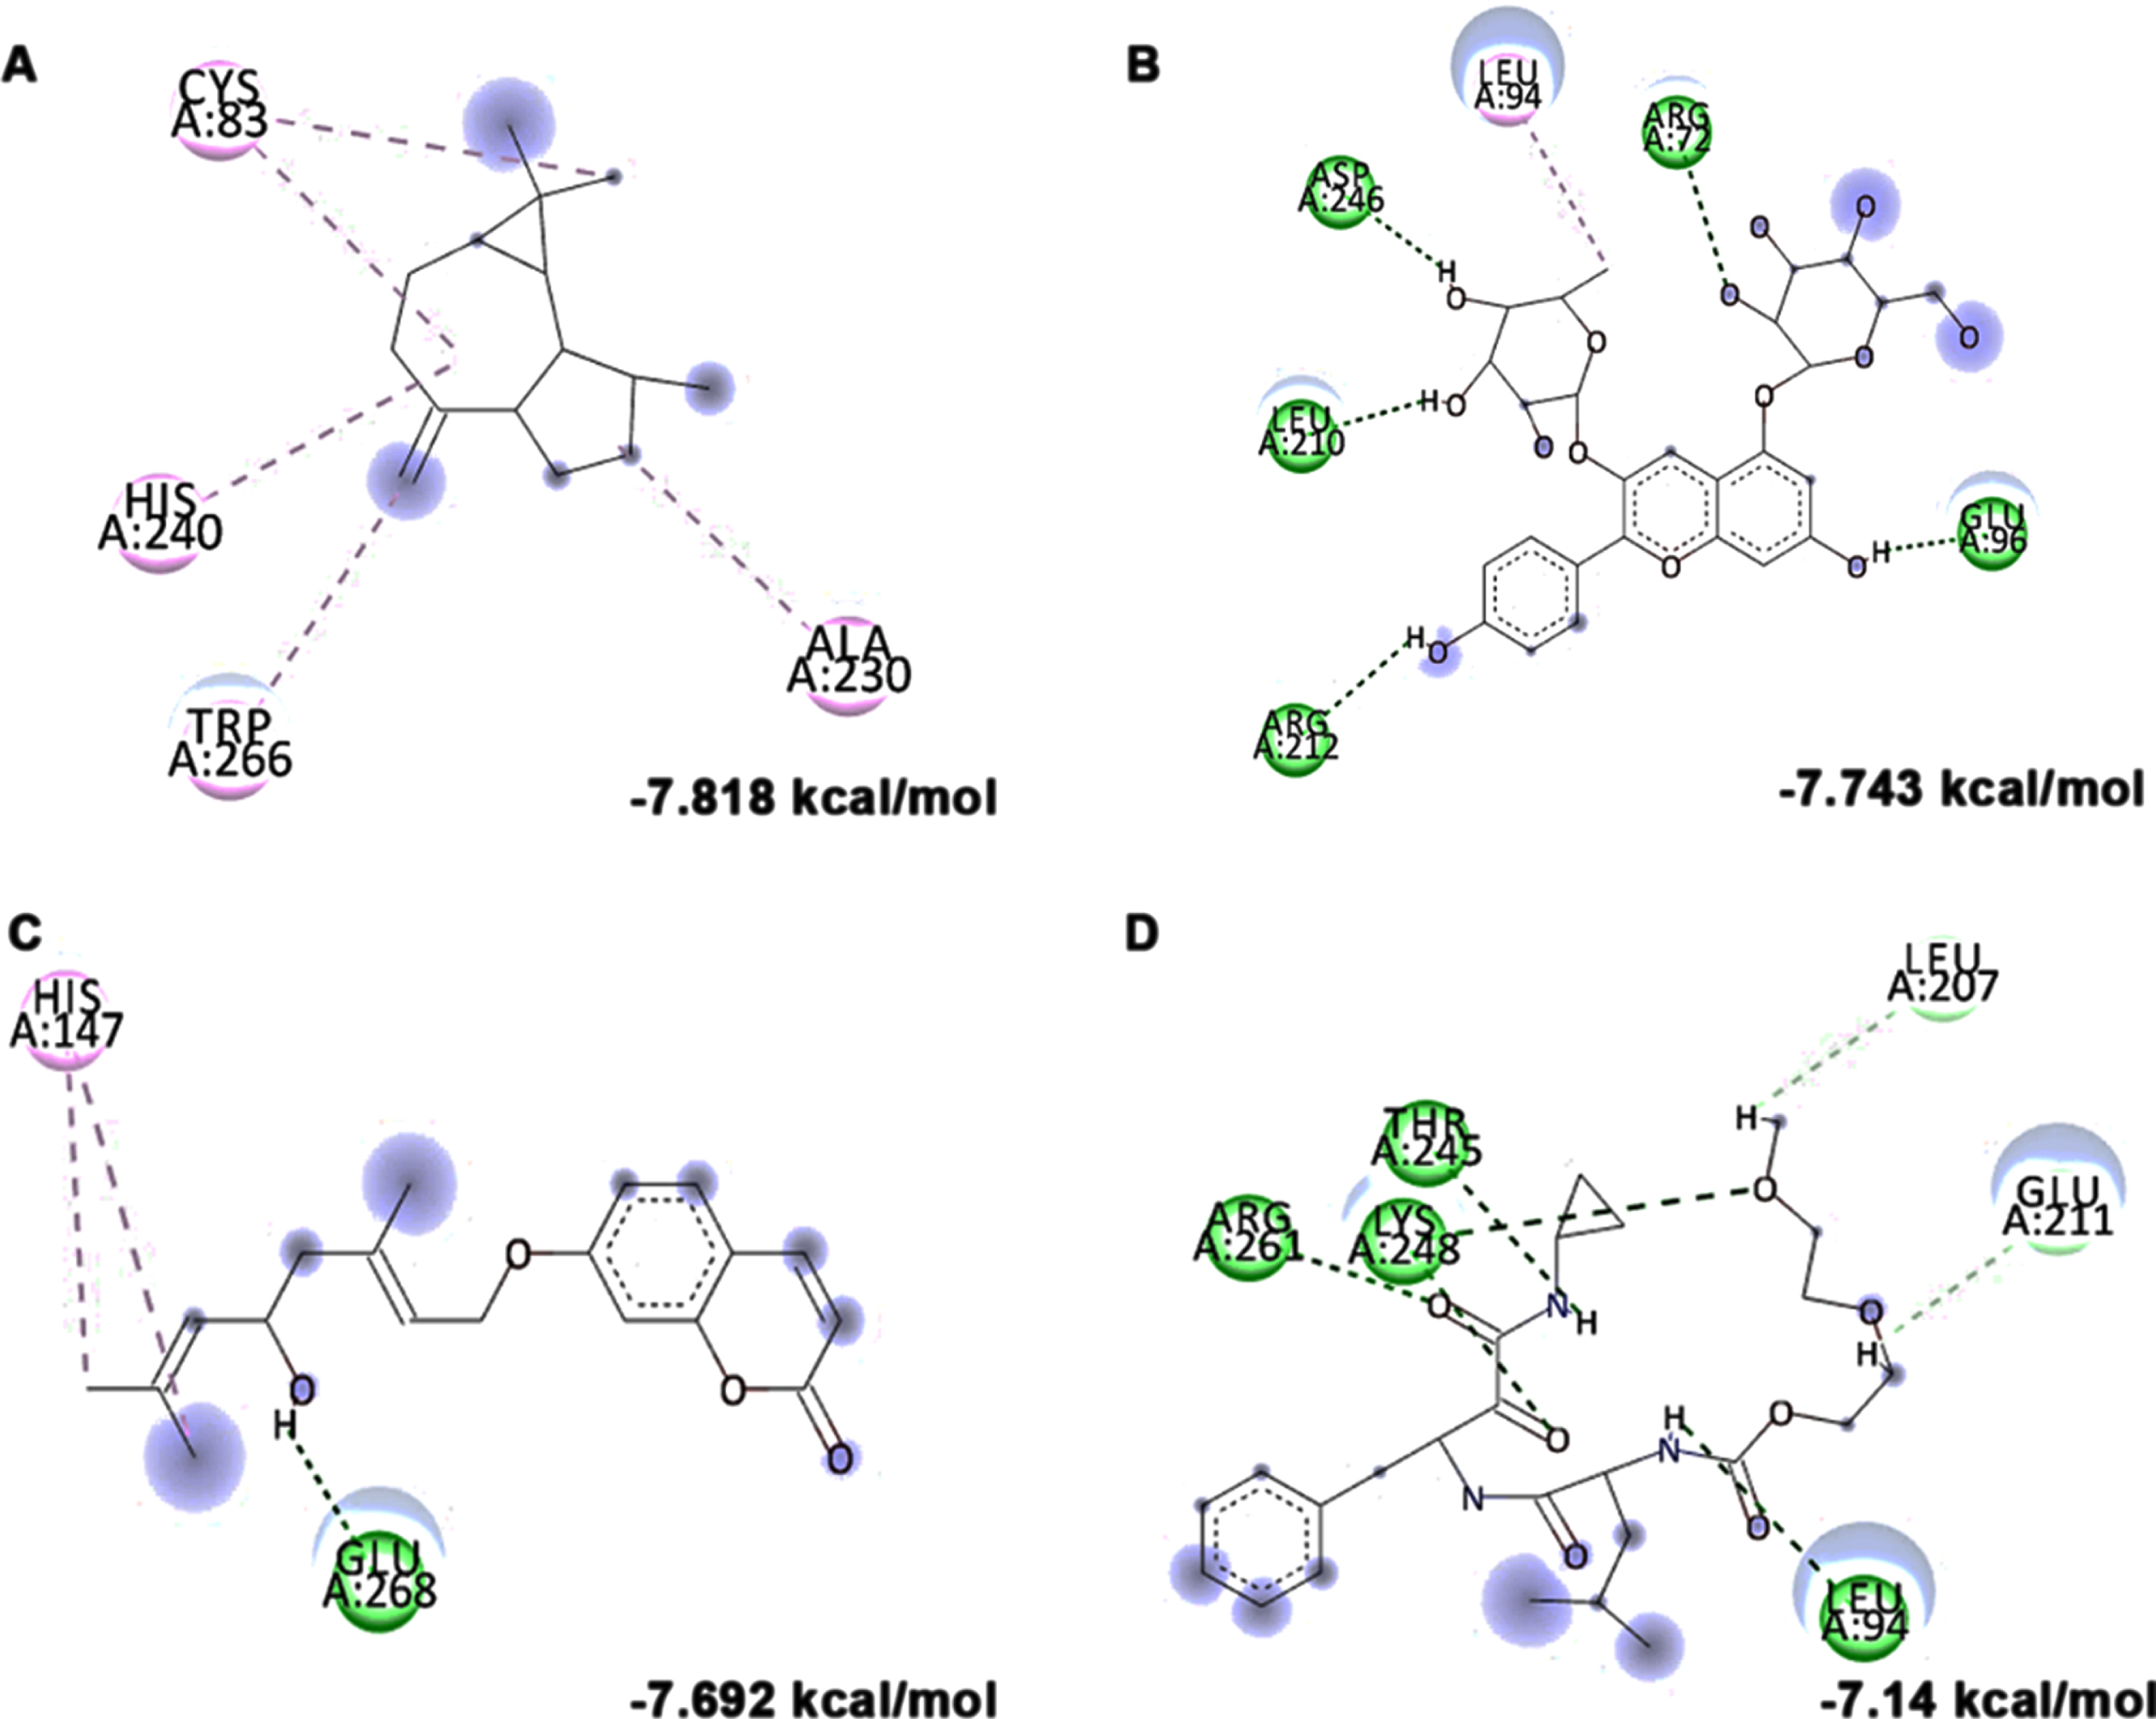 Molecular docking and mode of interaction of compounds (top 3 hits) from HS extract against Calpain-1 (A) allo-Aromadendrene (B) Pelargonidin 3-rhamnoside 5-glucoside (C) N-Feruloyltyramine (D) SNJ-1945 (Green indicates hydrogen bond, purple represents alkyl bond, pink represent a π-alkyl bond, yellow represent π-sulfur interactions)